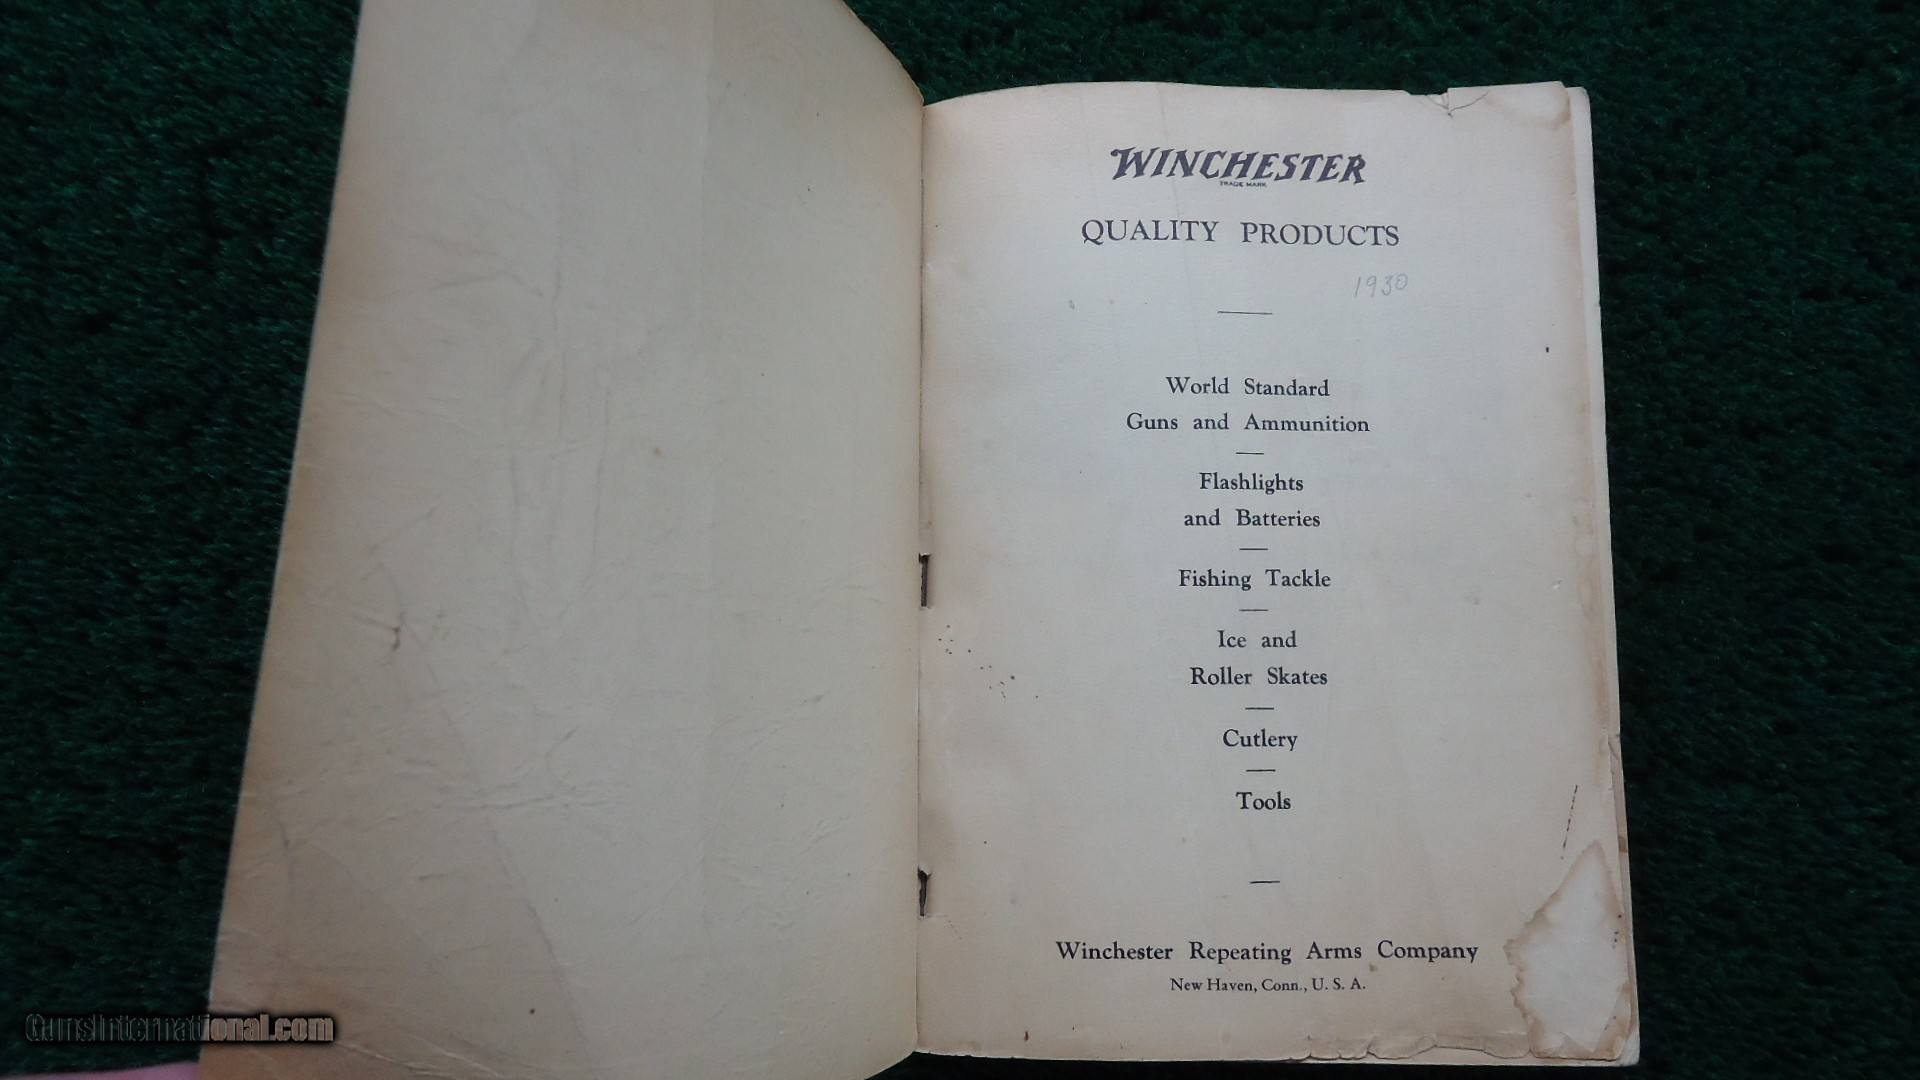 VINTAGE WINCHESTER QUALITY PRODUCTS CATALOGUE FROM 1930